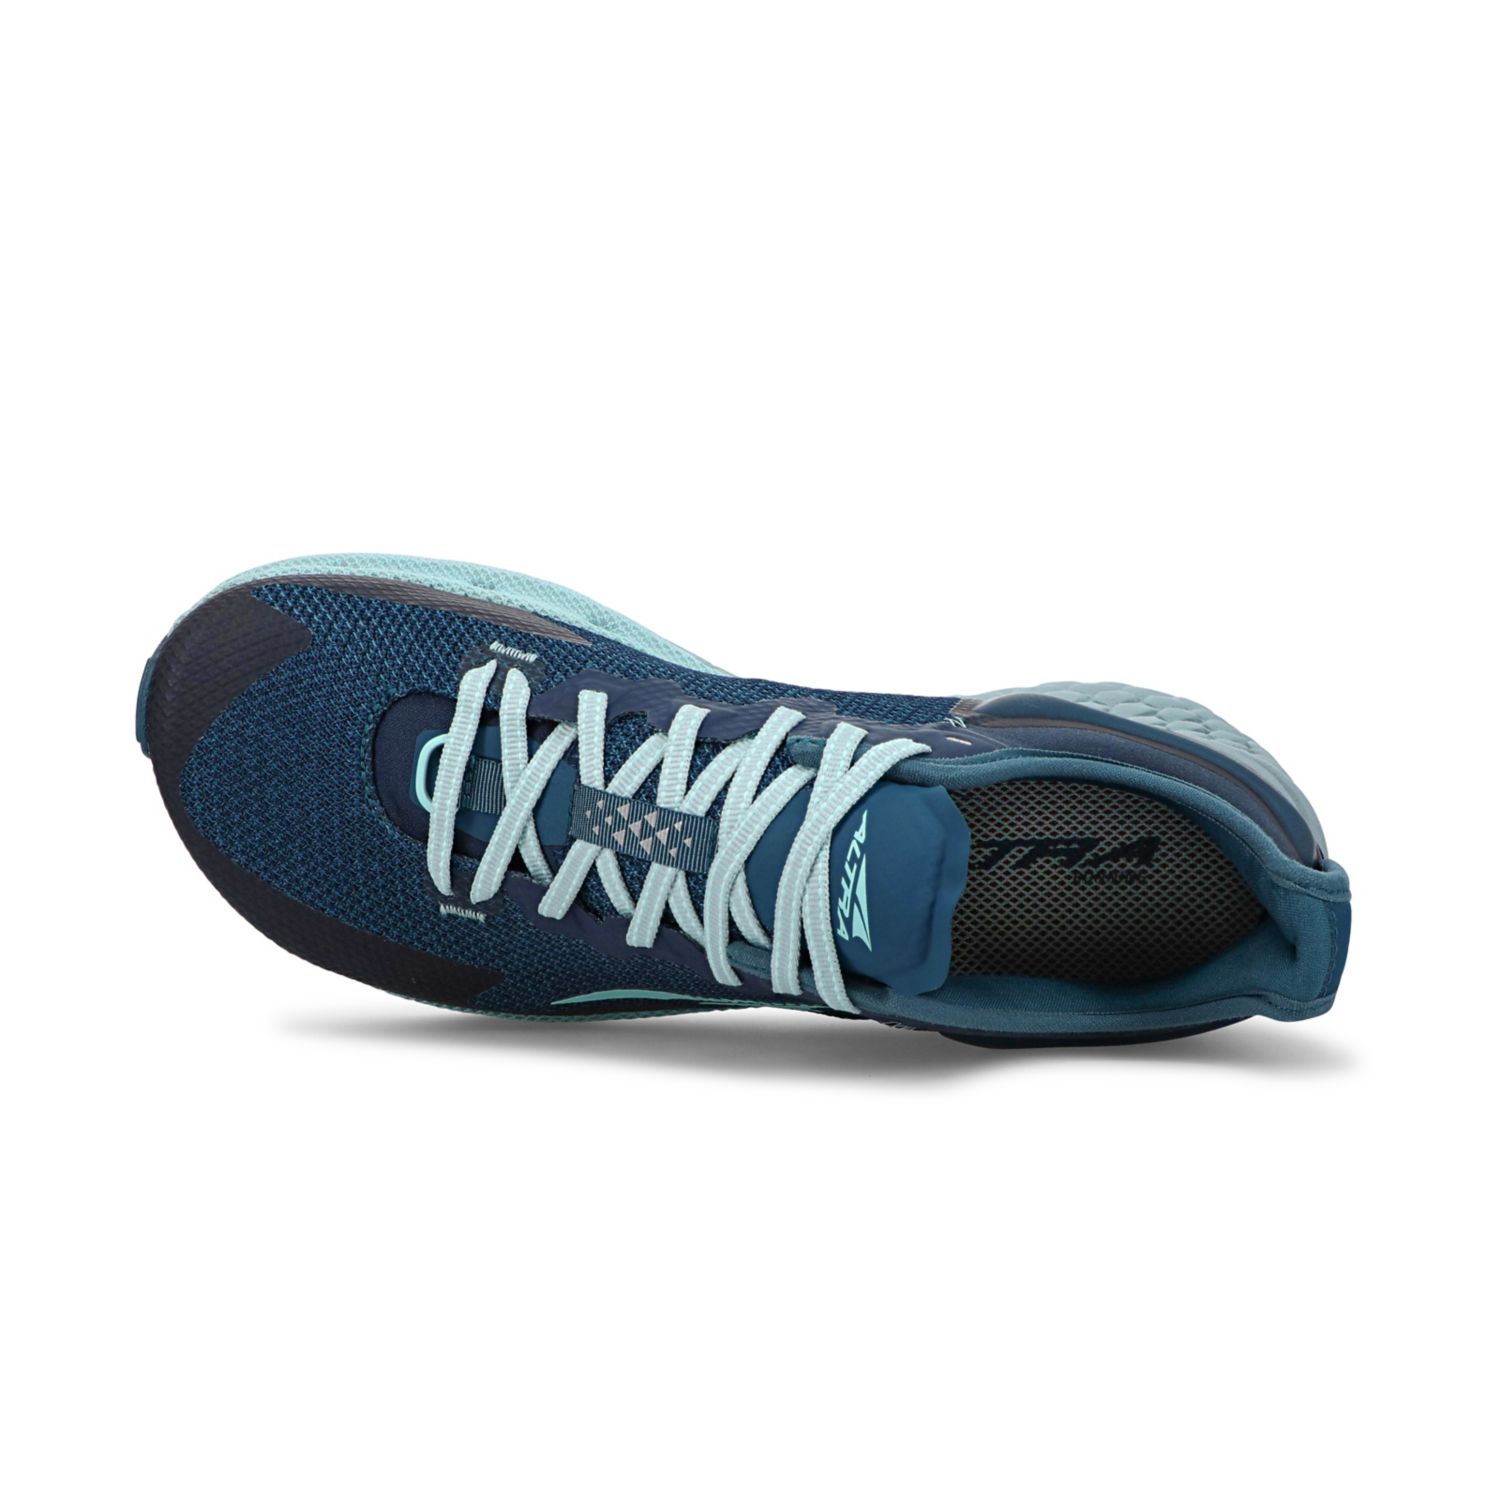 Deep Turquoise Altra Timp 4 Women's Trail Running Shoes | Ireland-73029189